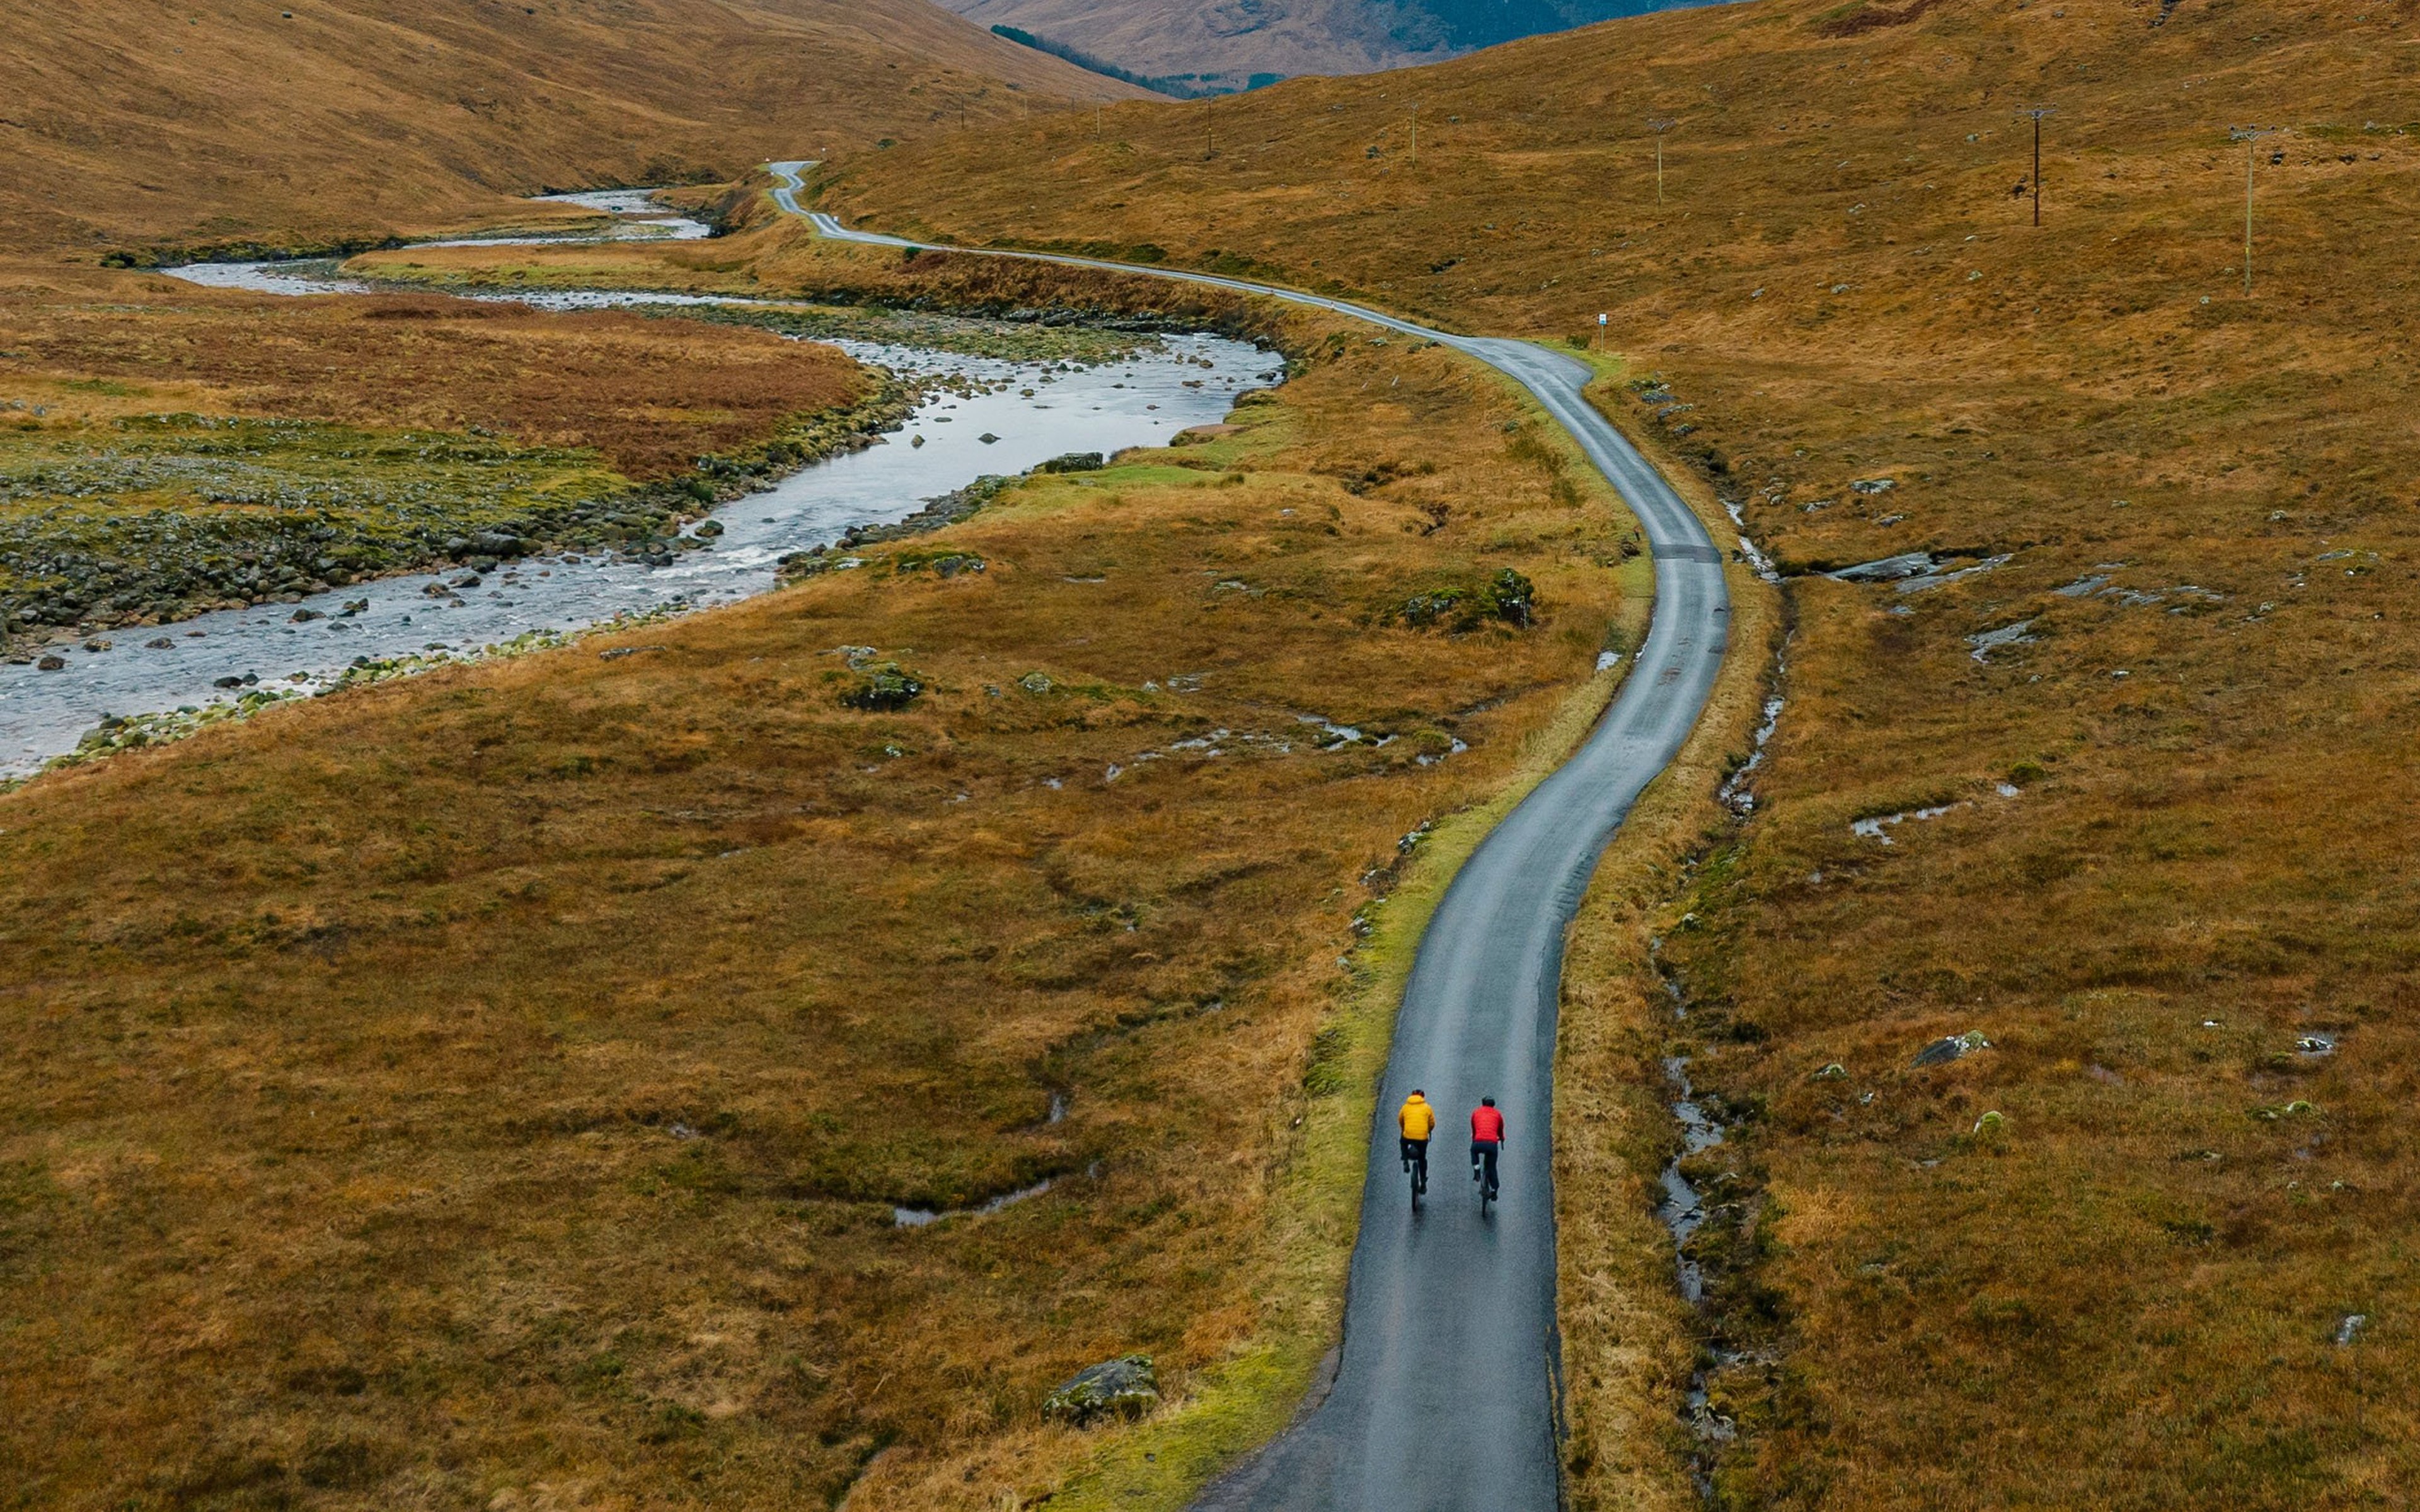 Two adventure cyclists on a single track road in the Scottish Highlands.